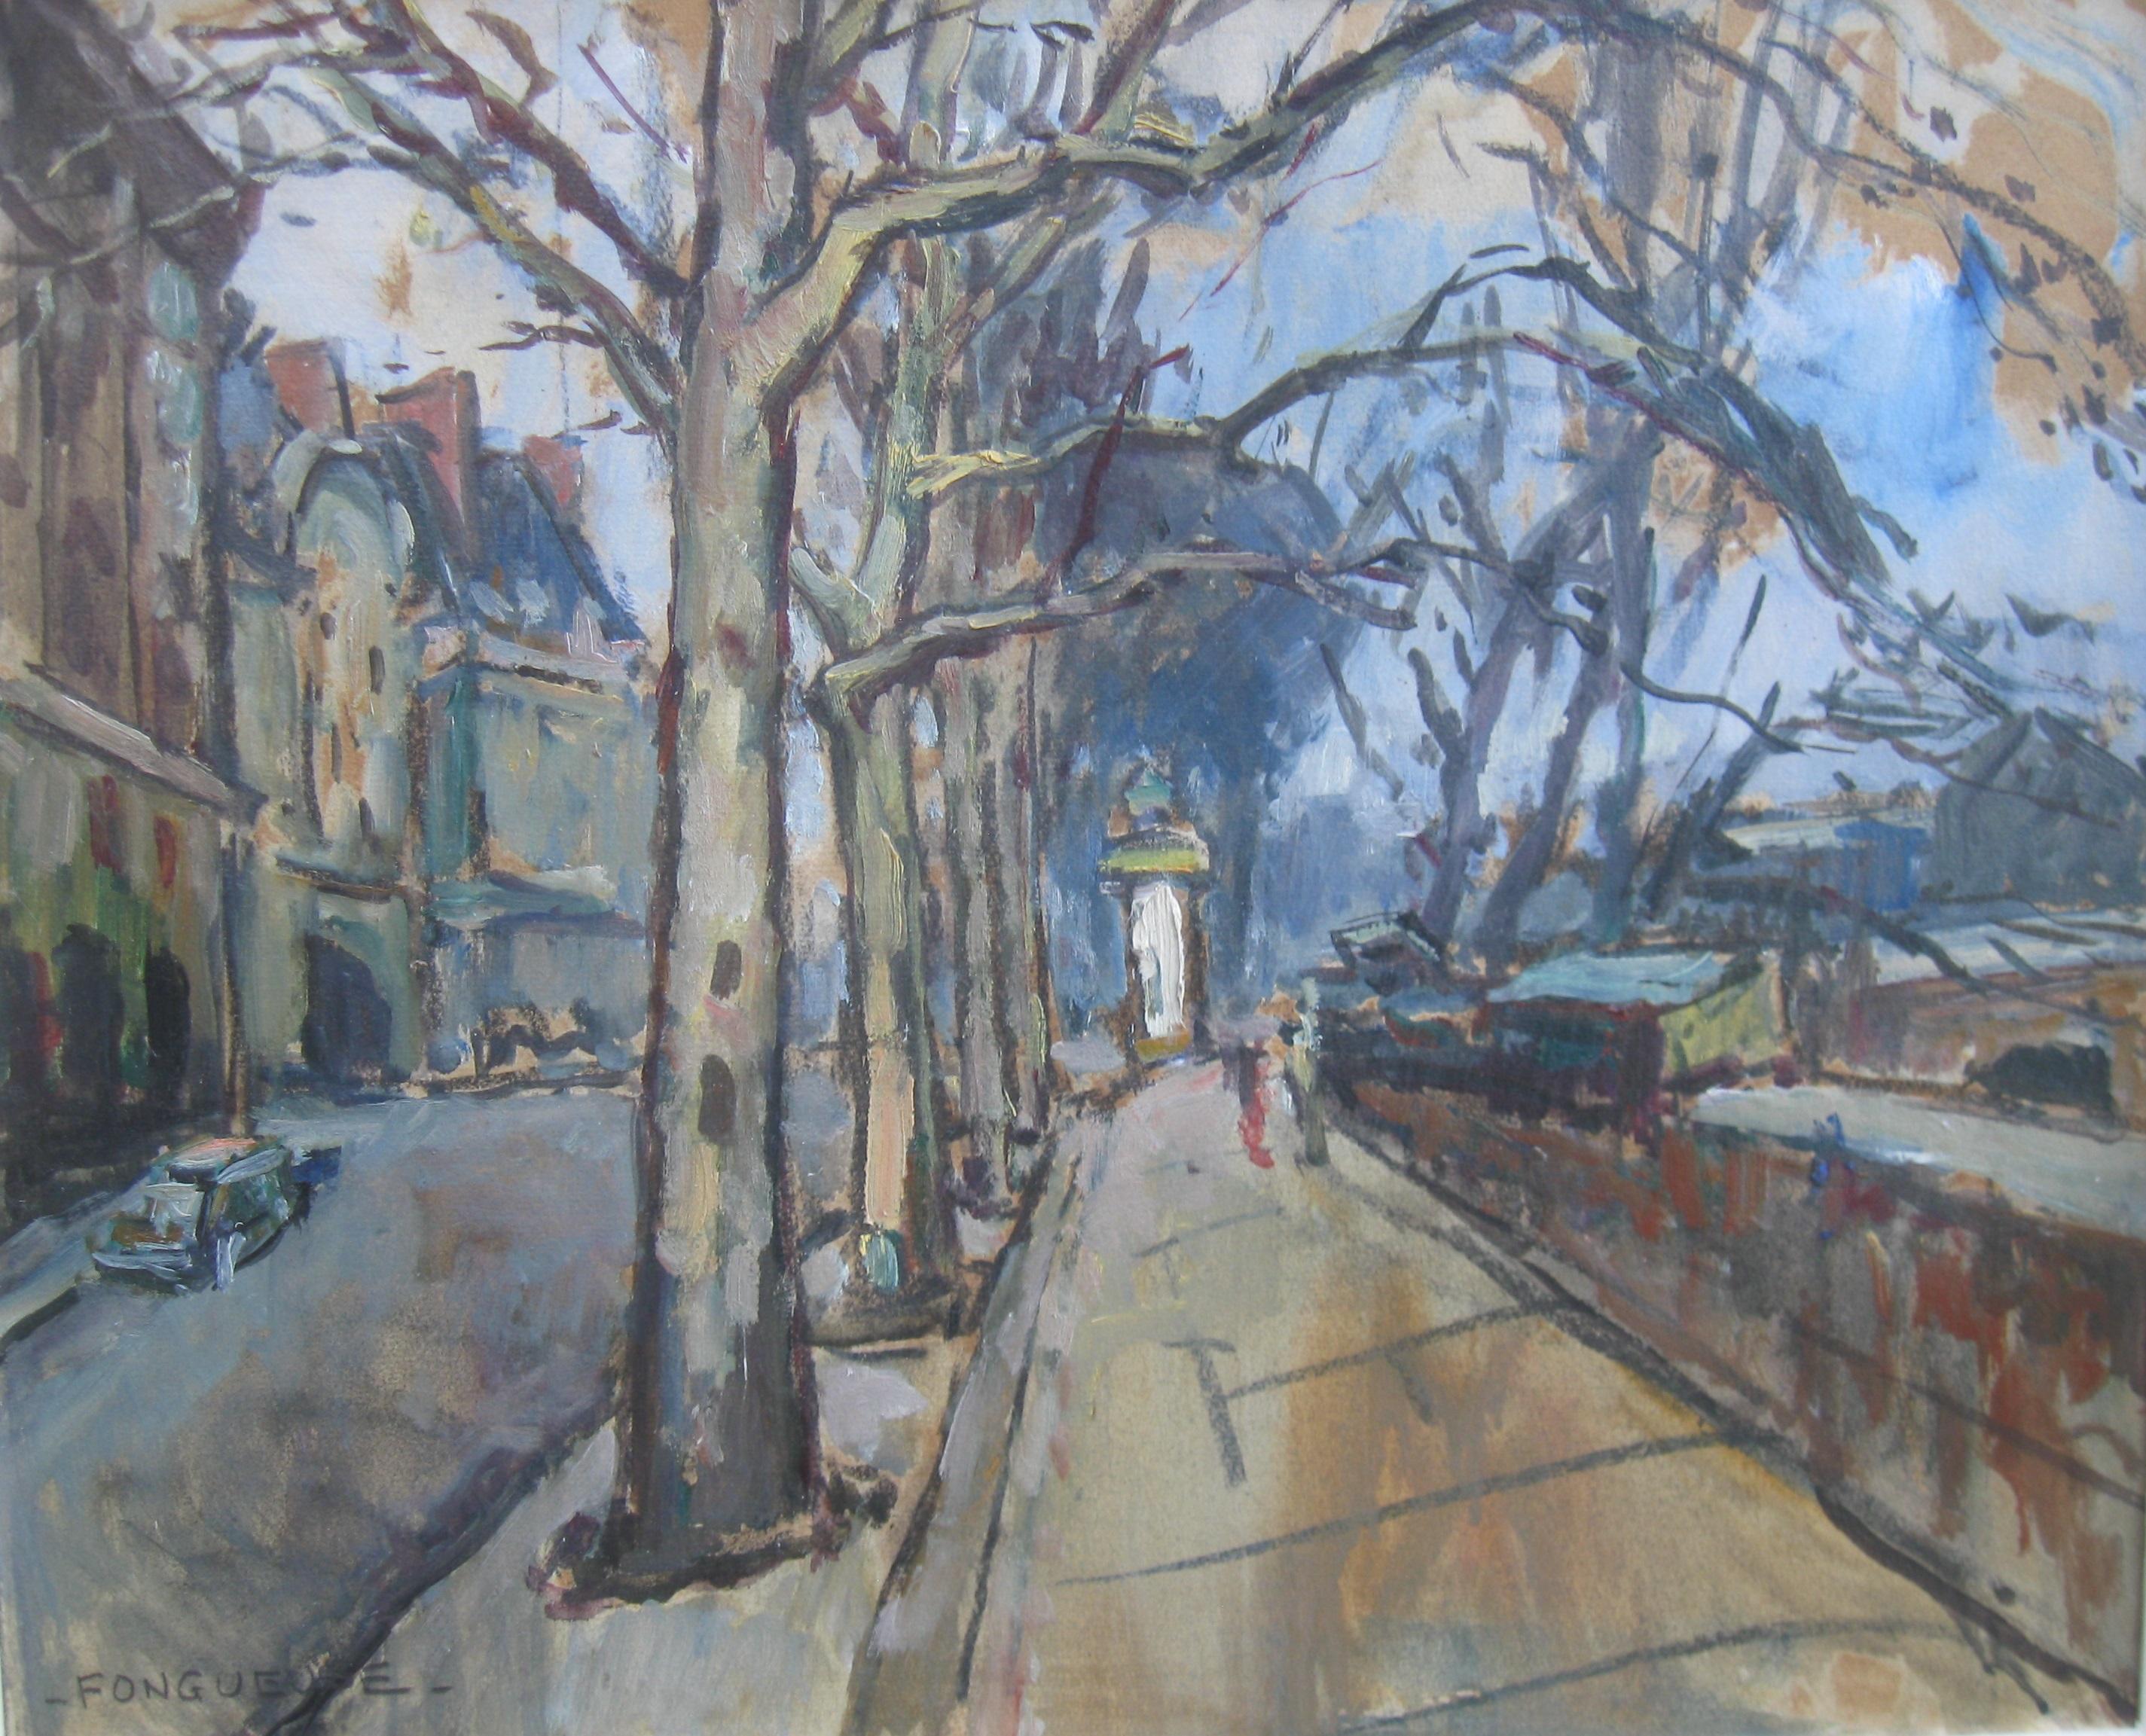 French Impressionist: Paris Street Scene near The river Seine oil circa 1950's - Painting by Maurice Fongueuse